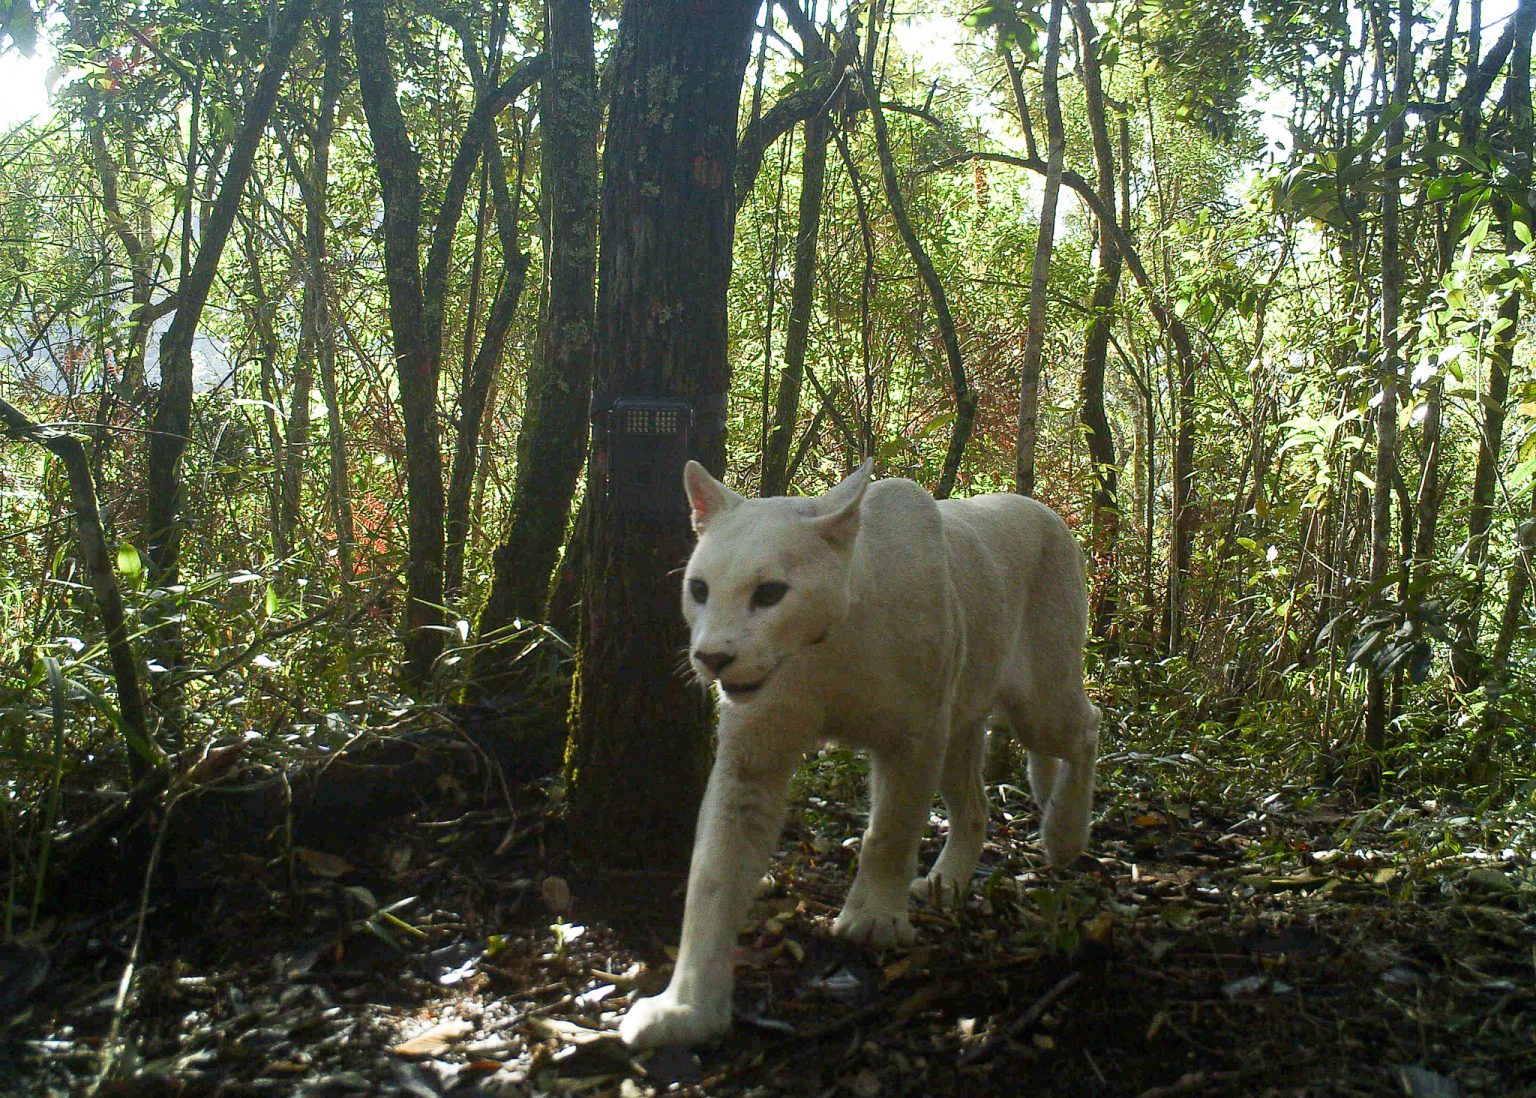 The first white cougar was seen in the jungles of Brazil’s Atlantic Ocean.